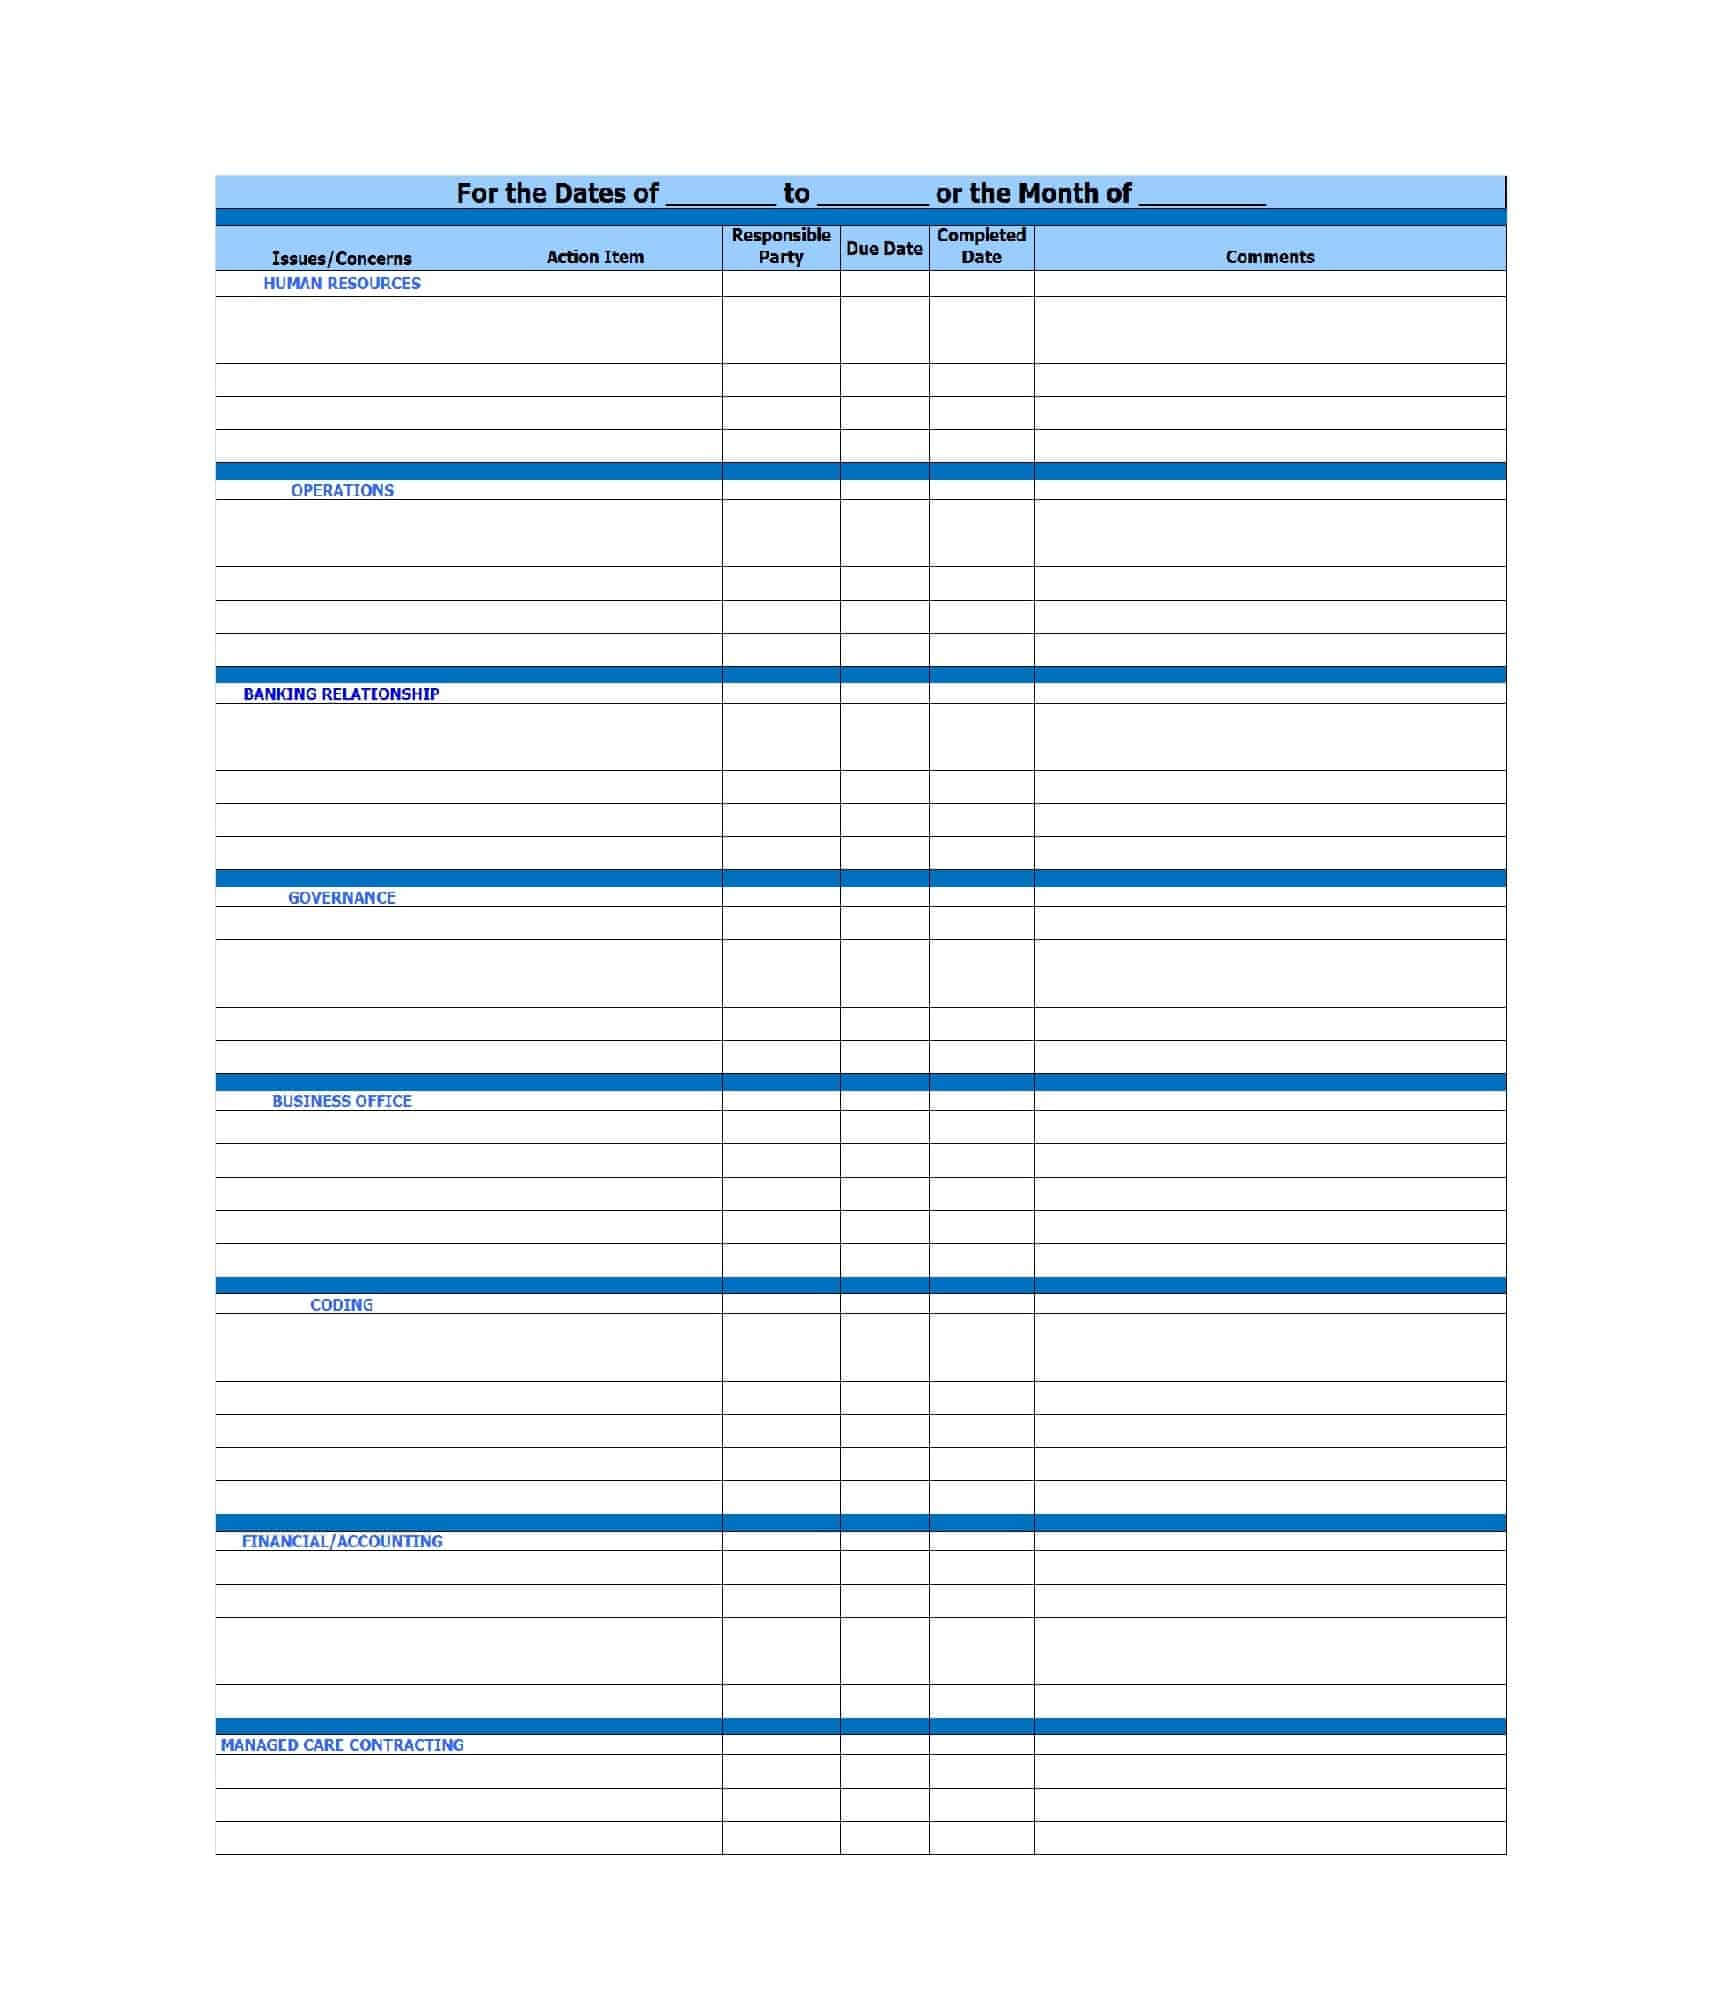 49 Great Action Item Templates (Ms Word & Excel) ᐅ Template Lab In Agenda Template Word 2010